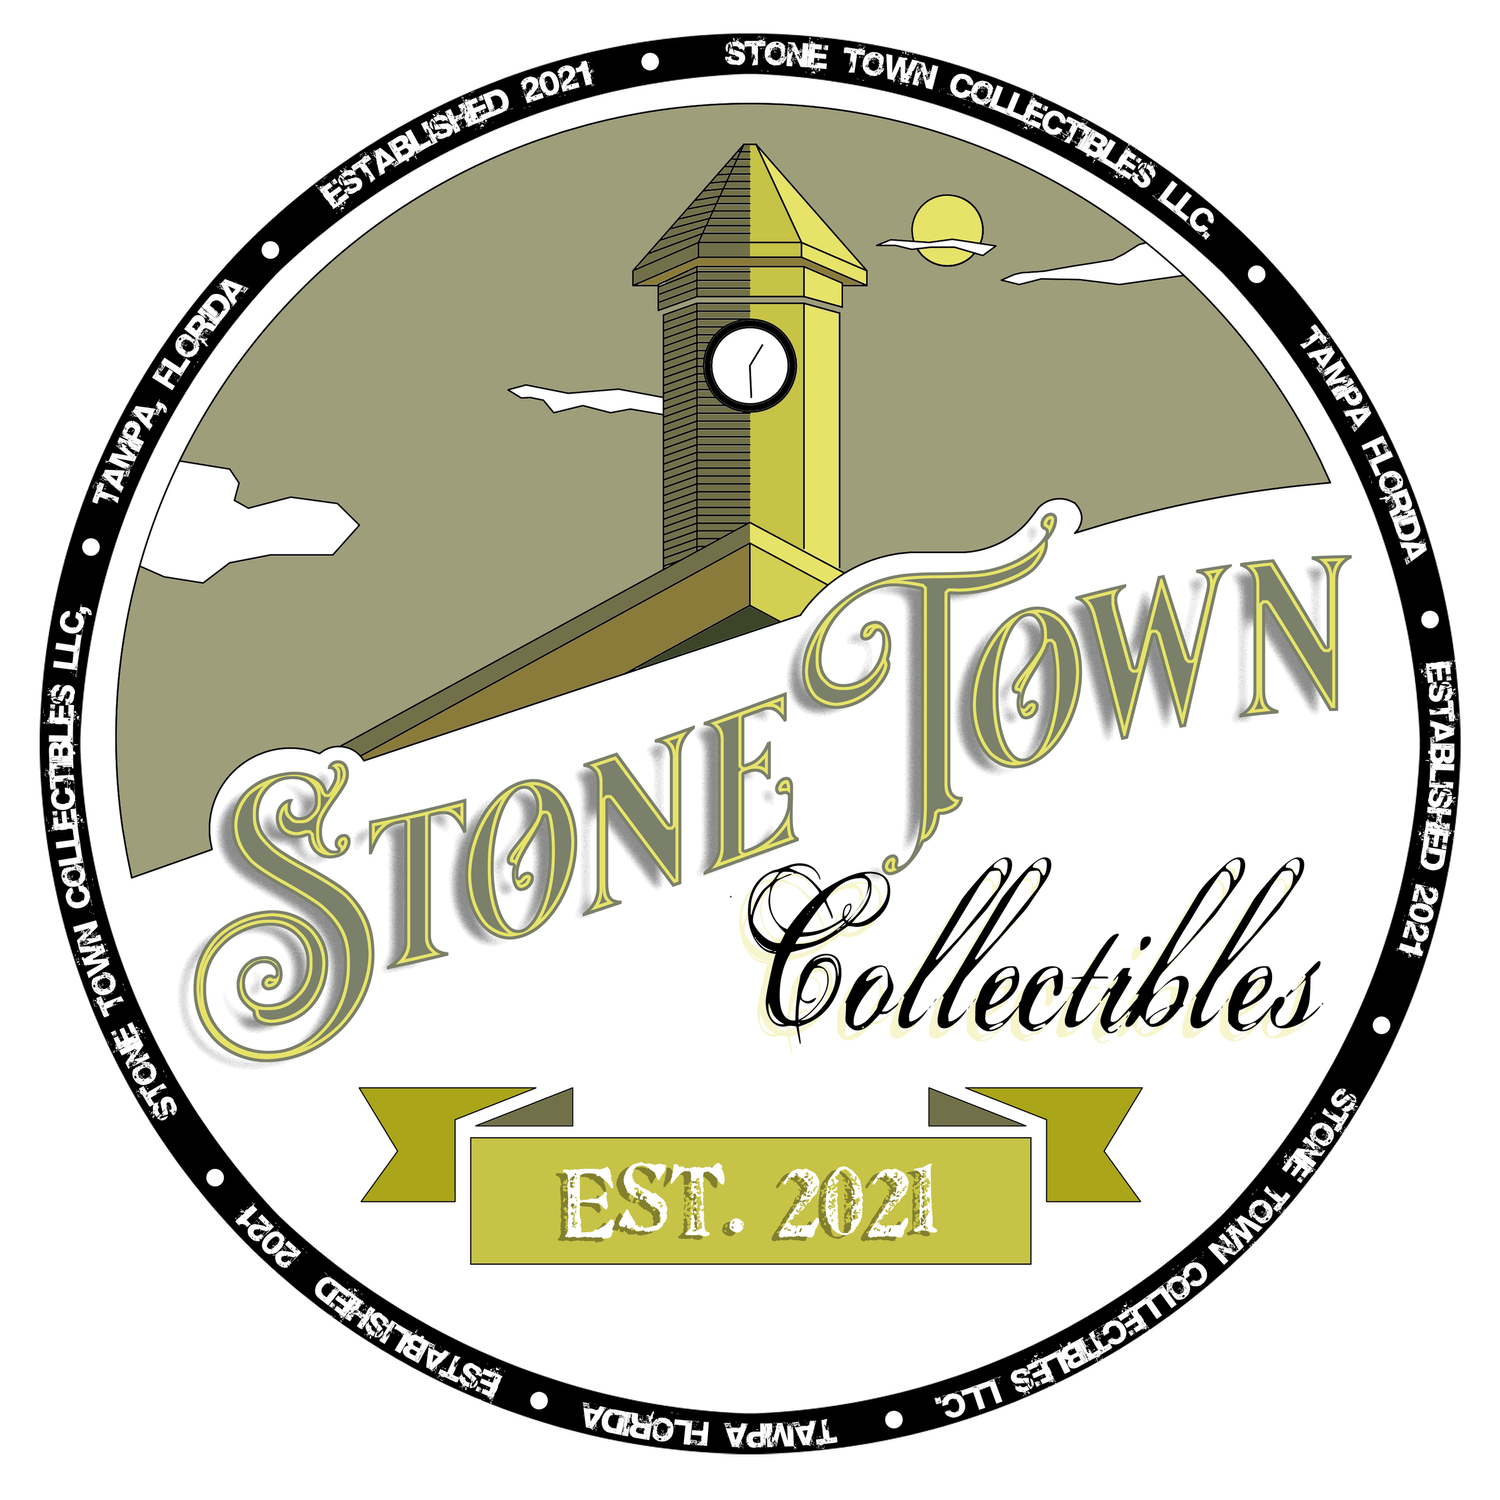 Stone Town Collectibles